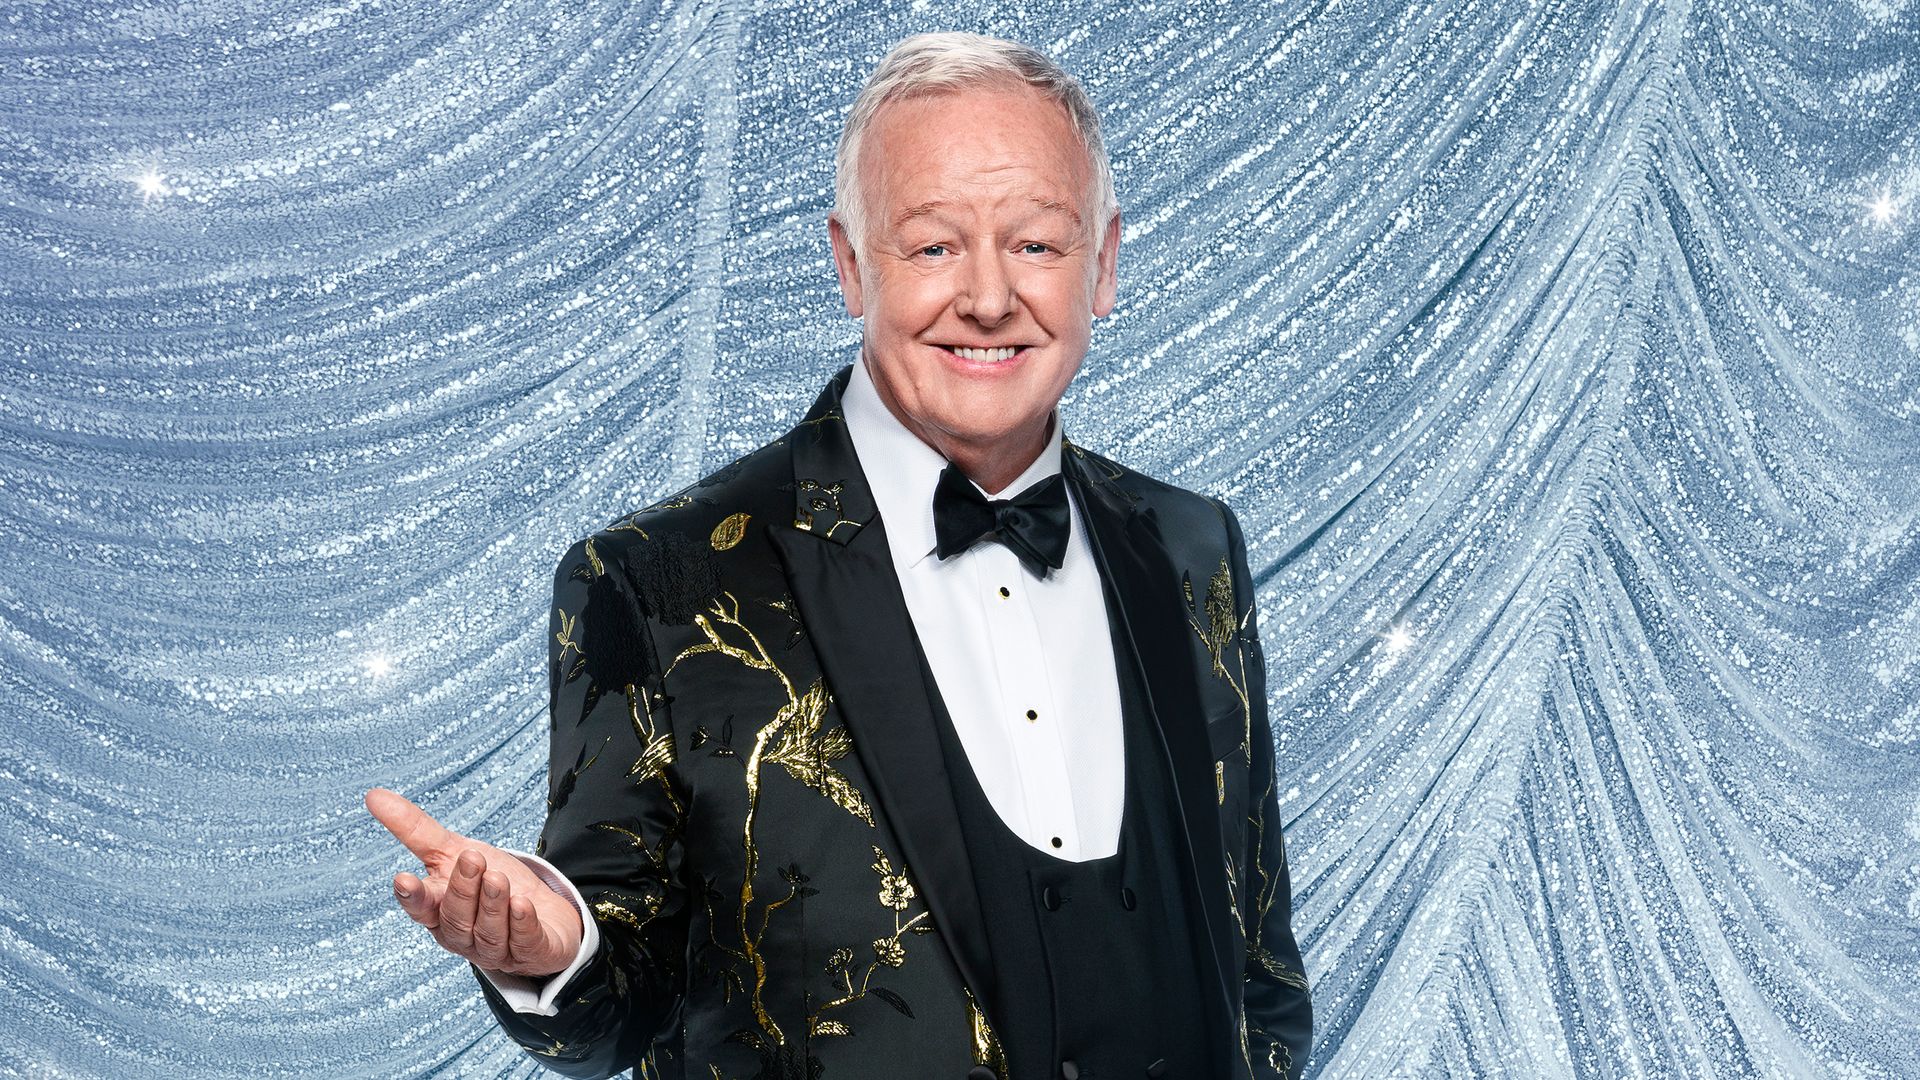 Les Dennis wears a suit and stands in front of blue glittery sheet for Strictly portrait